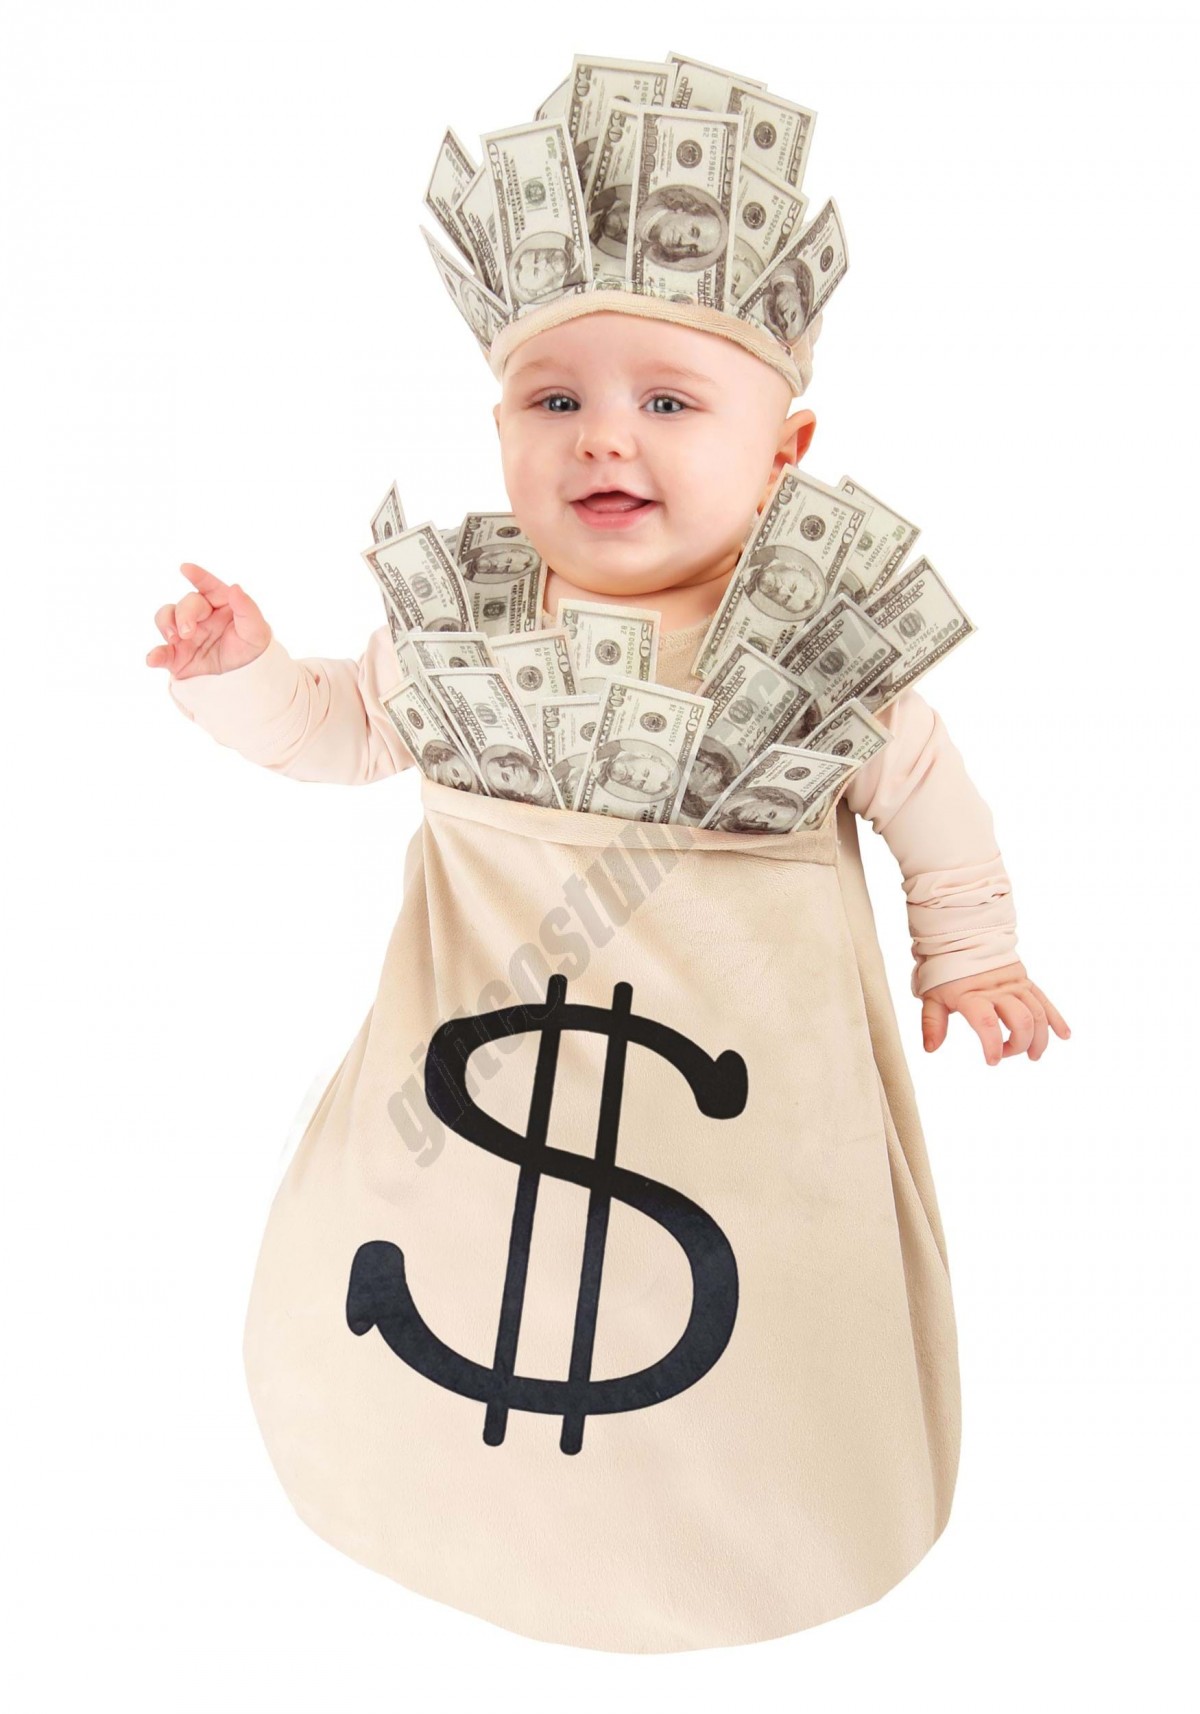 Money Bag Baby Costume Promotions - -0